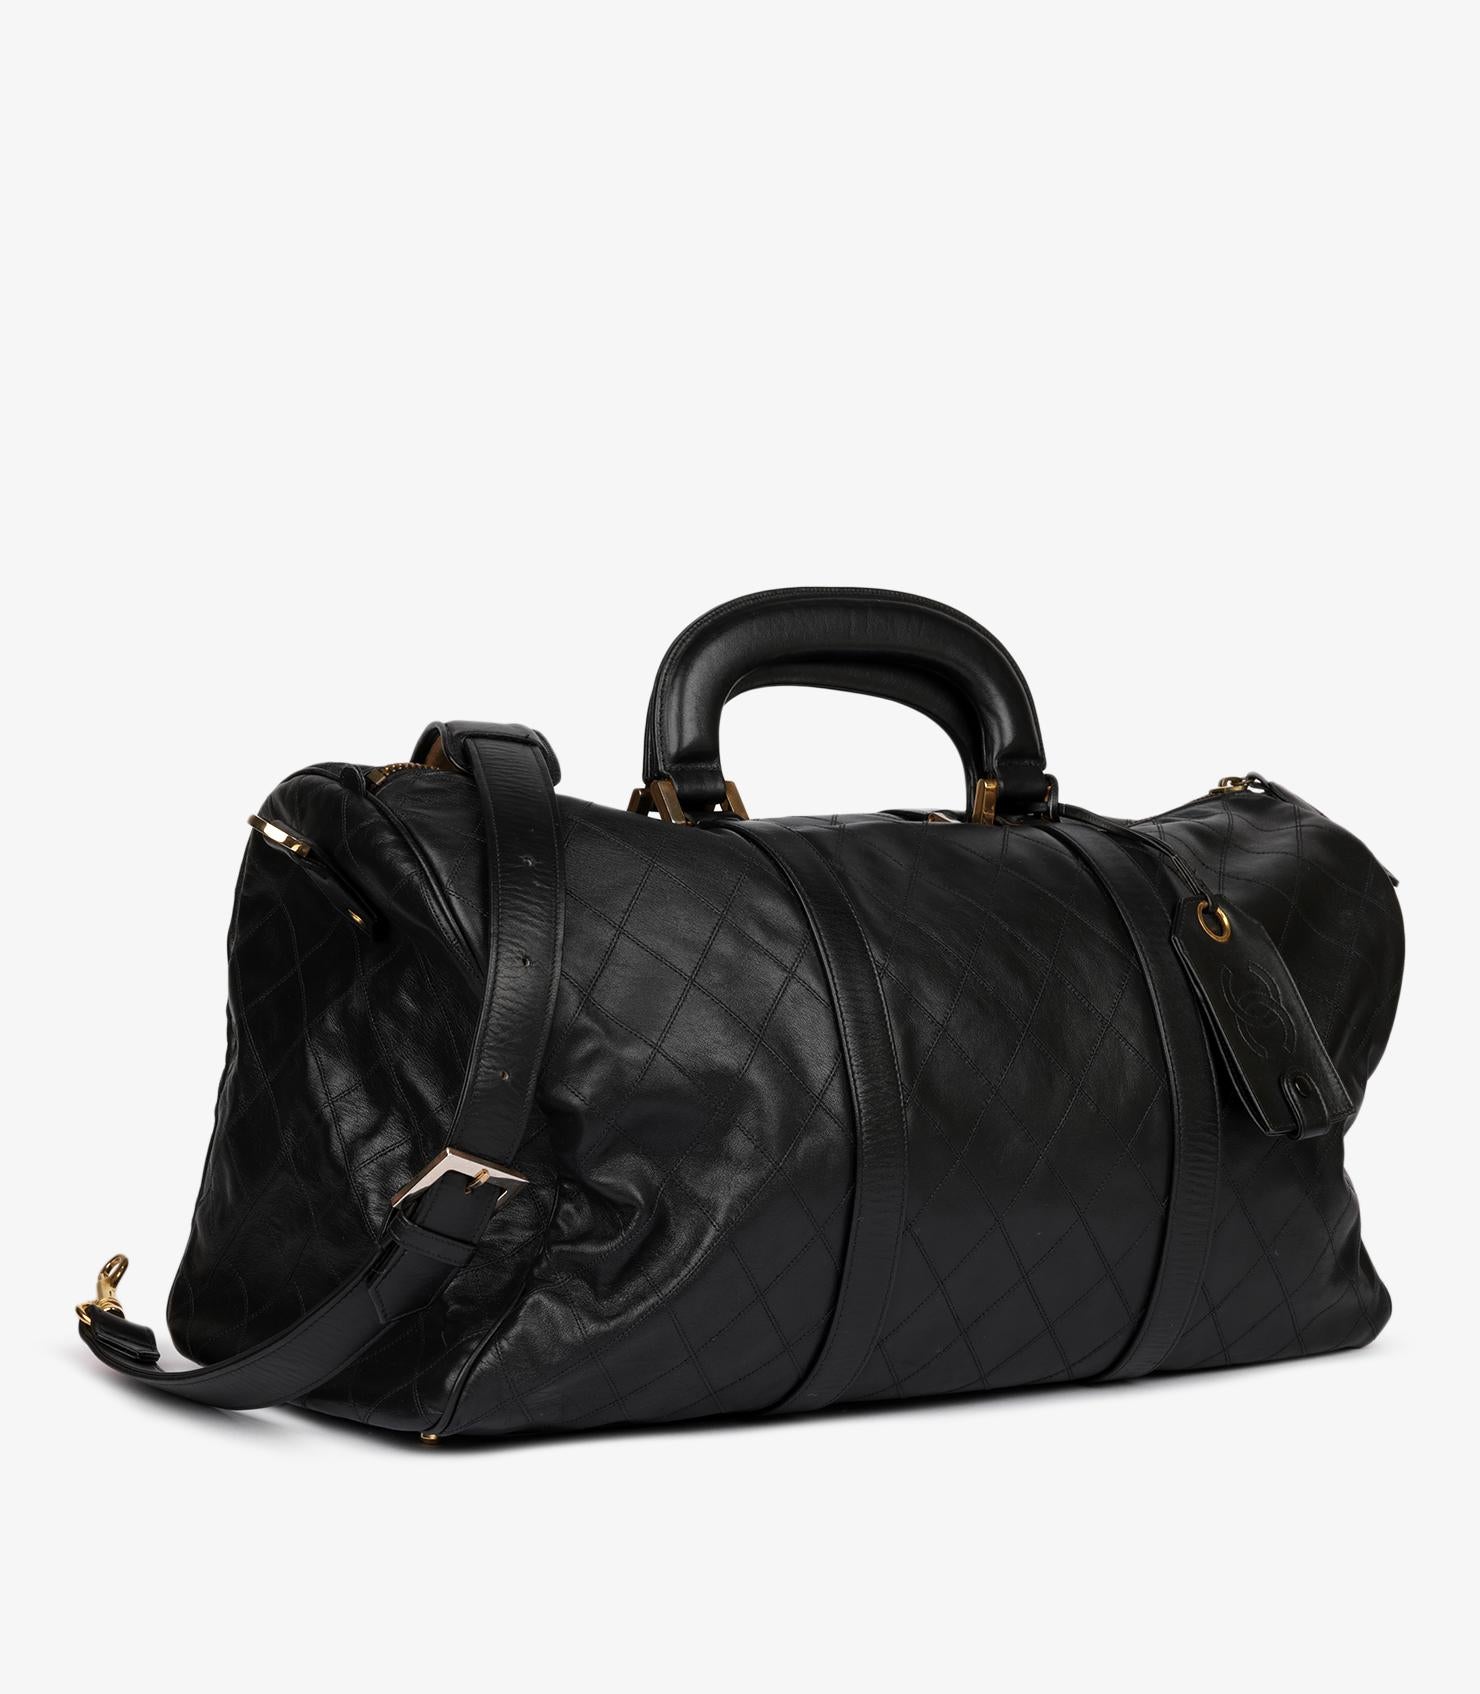 Chanel Black Quilted Lambskin Vintage Boston Travel Bag 50cm

Brand- Chanel
Model- Boston Travel Bag 50cm
Product Type- Shoulder, Tote, Travel
Serial Number- 65****
Age- Circa 1990
Accompanied By- Chanel Dust Bag, Shoulder Strap, Authenticity Card,